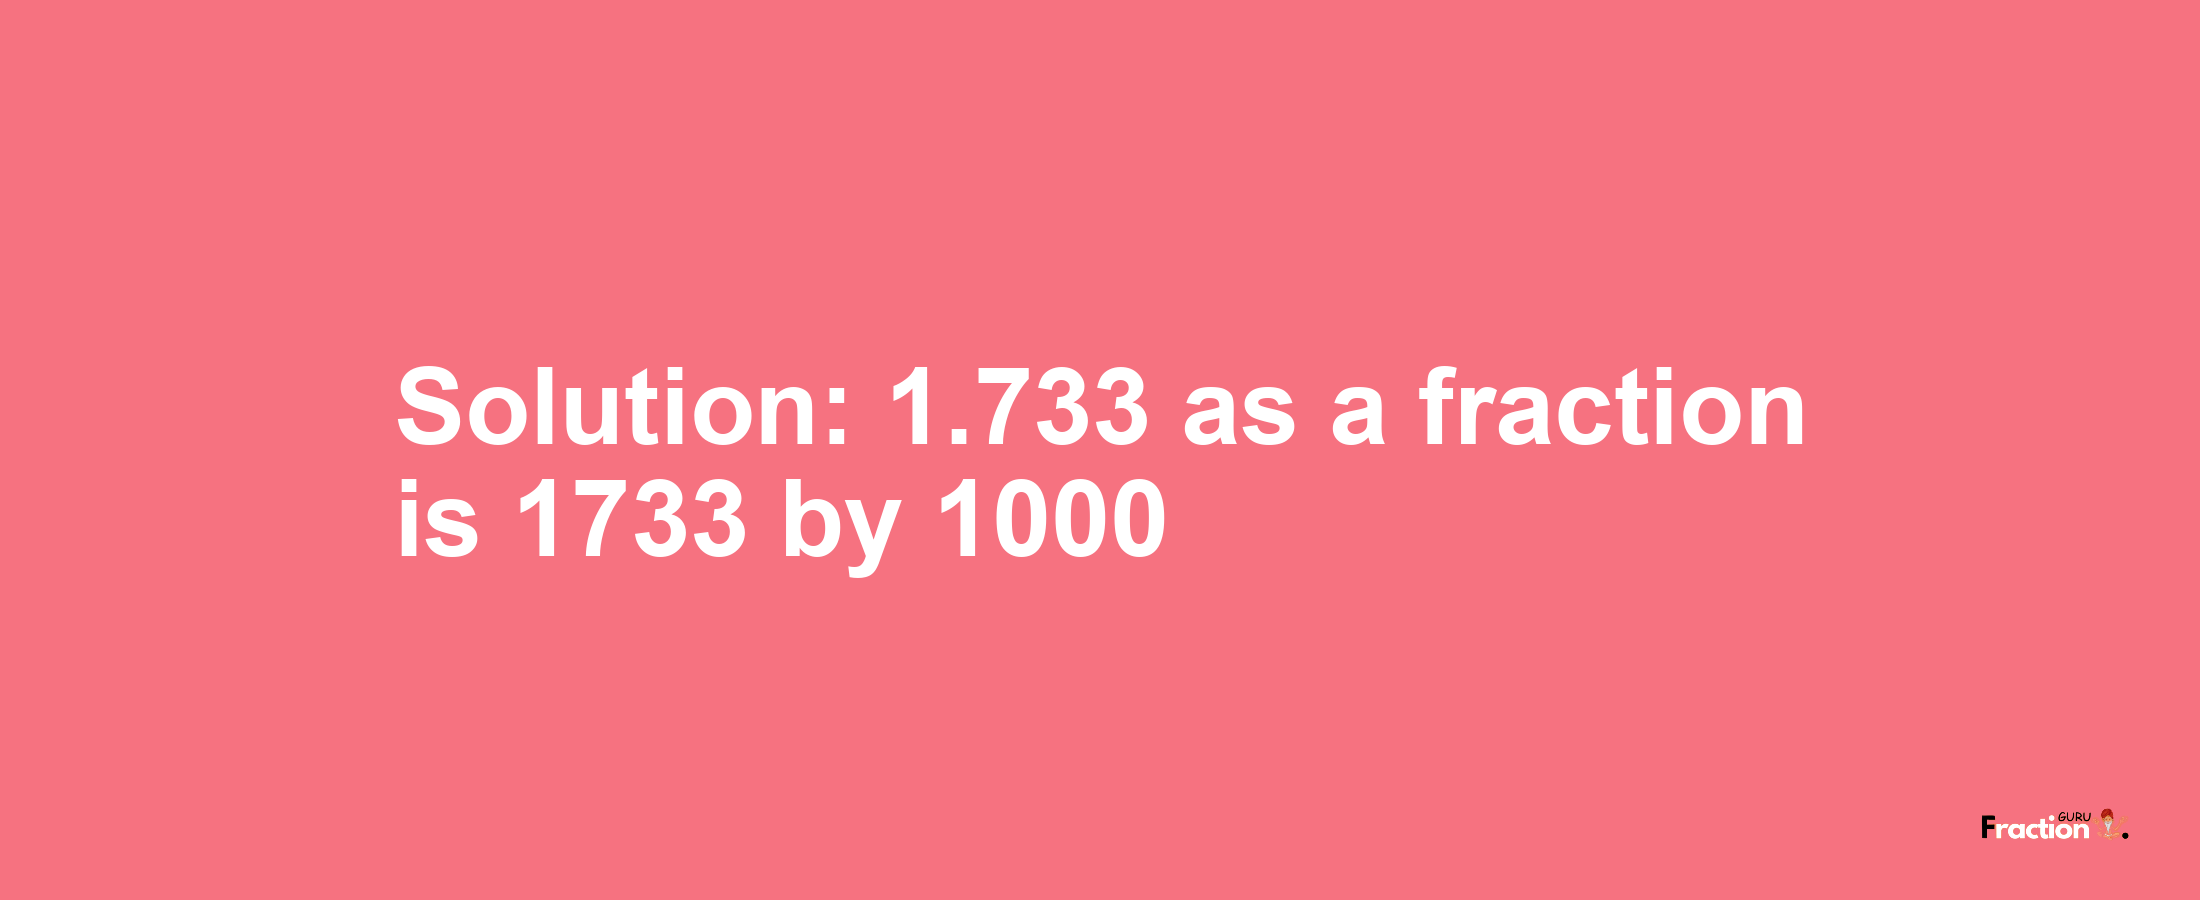 Solution:1.733 as a fraction is 1733/1000